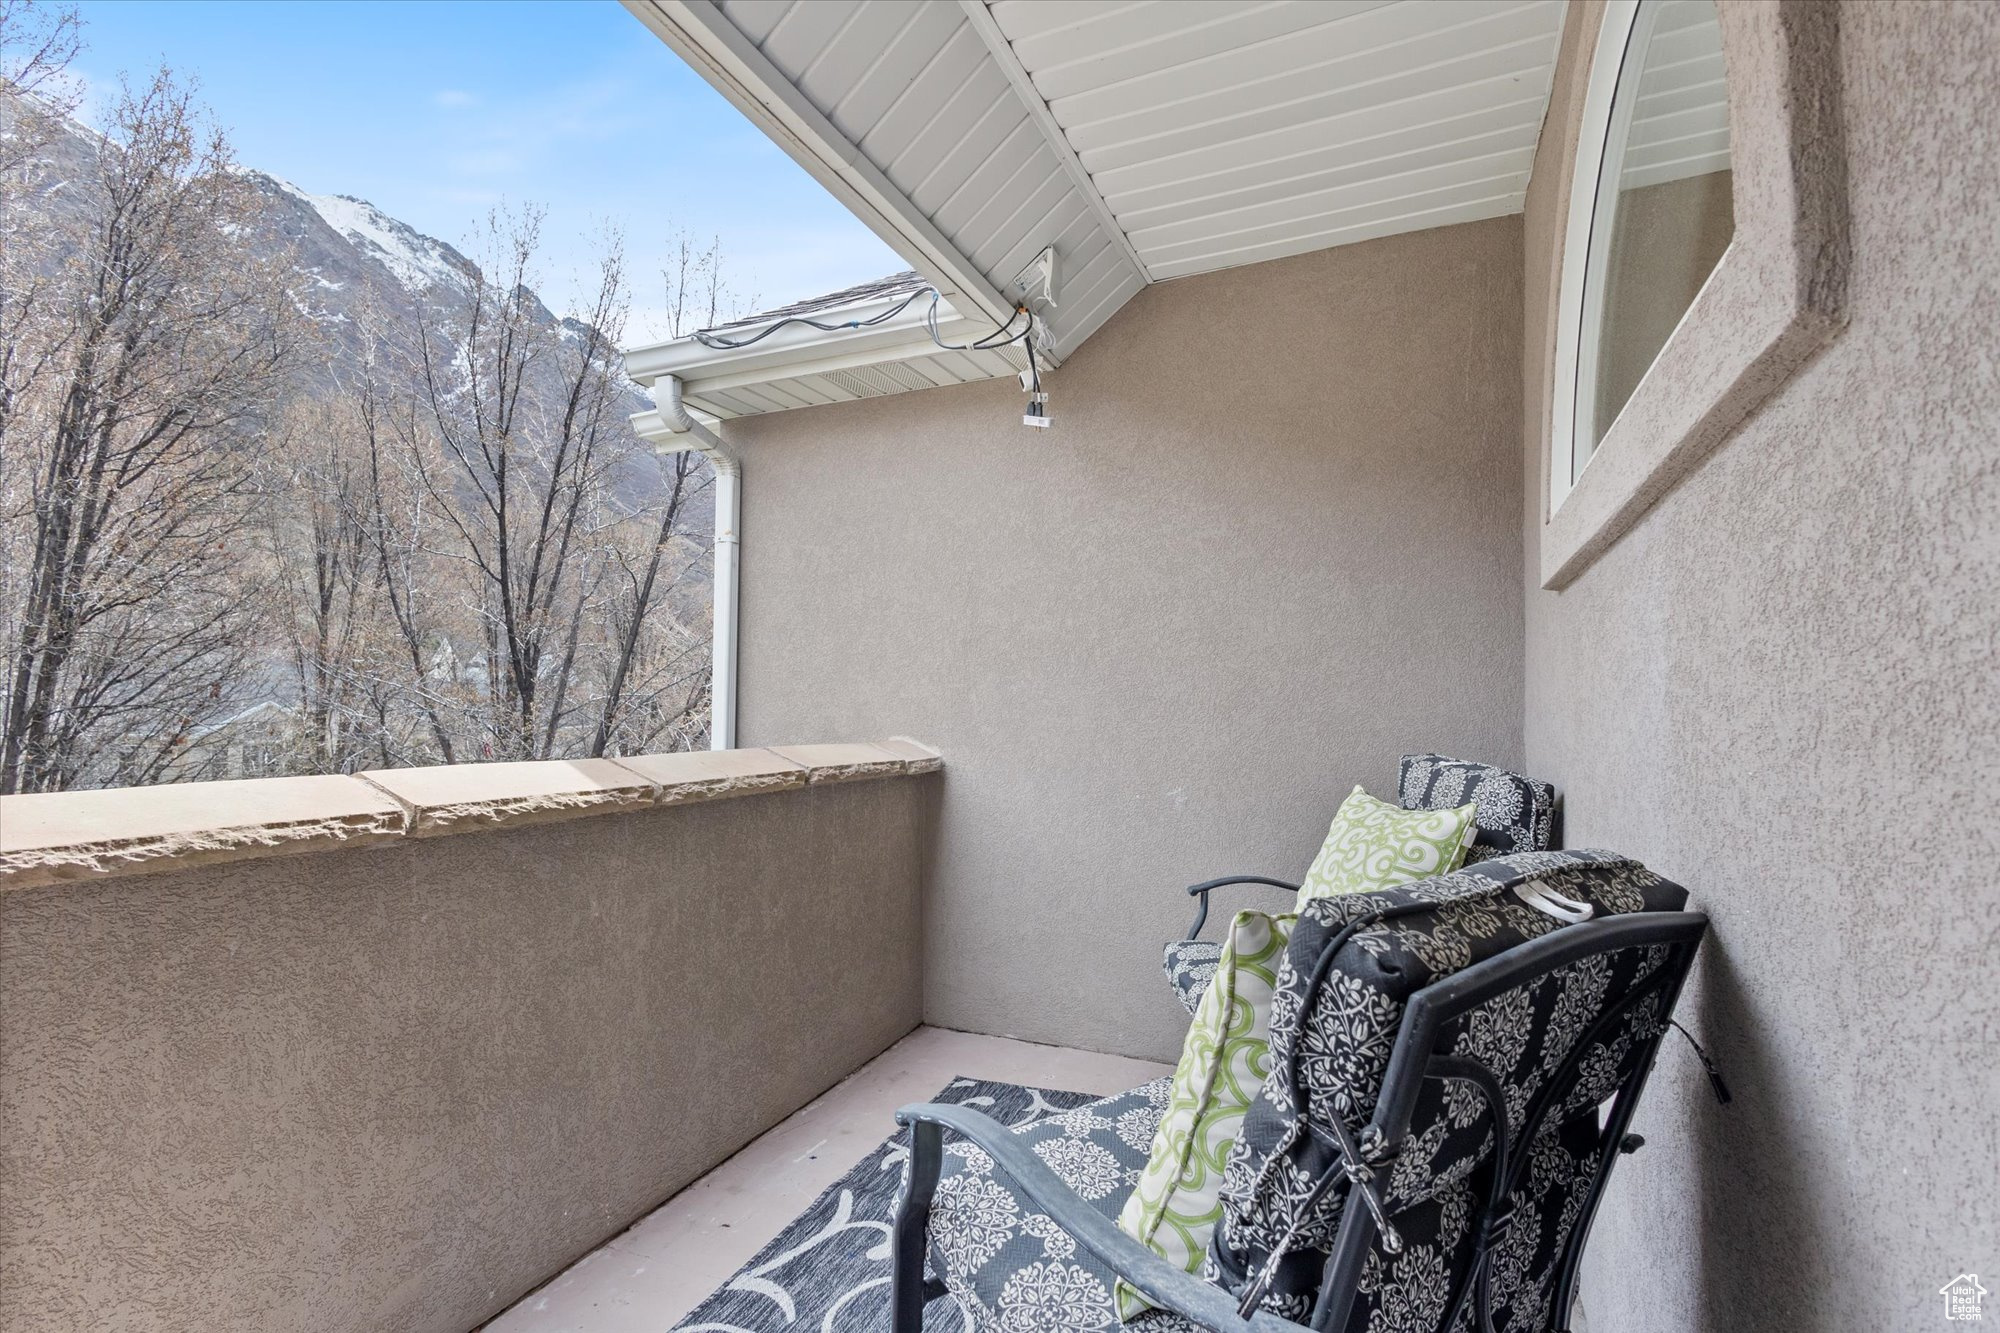 Balcony connected to primary bedroom with mountain views